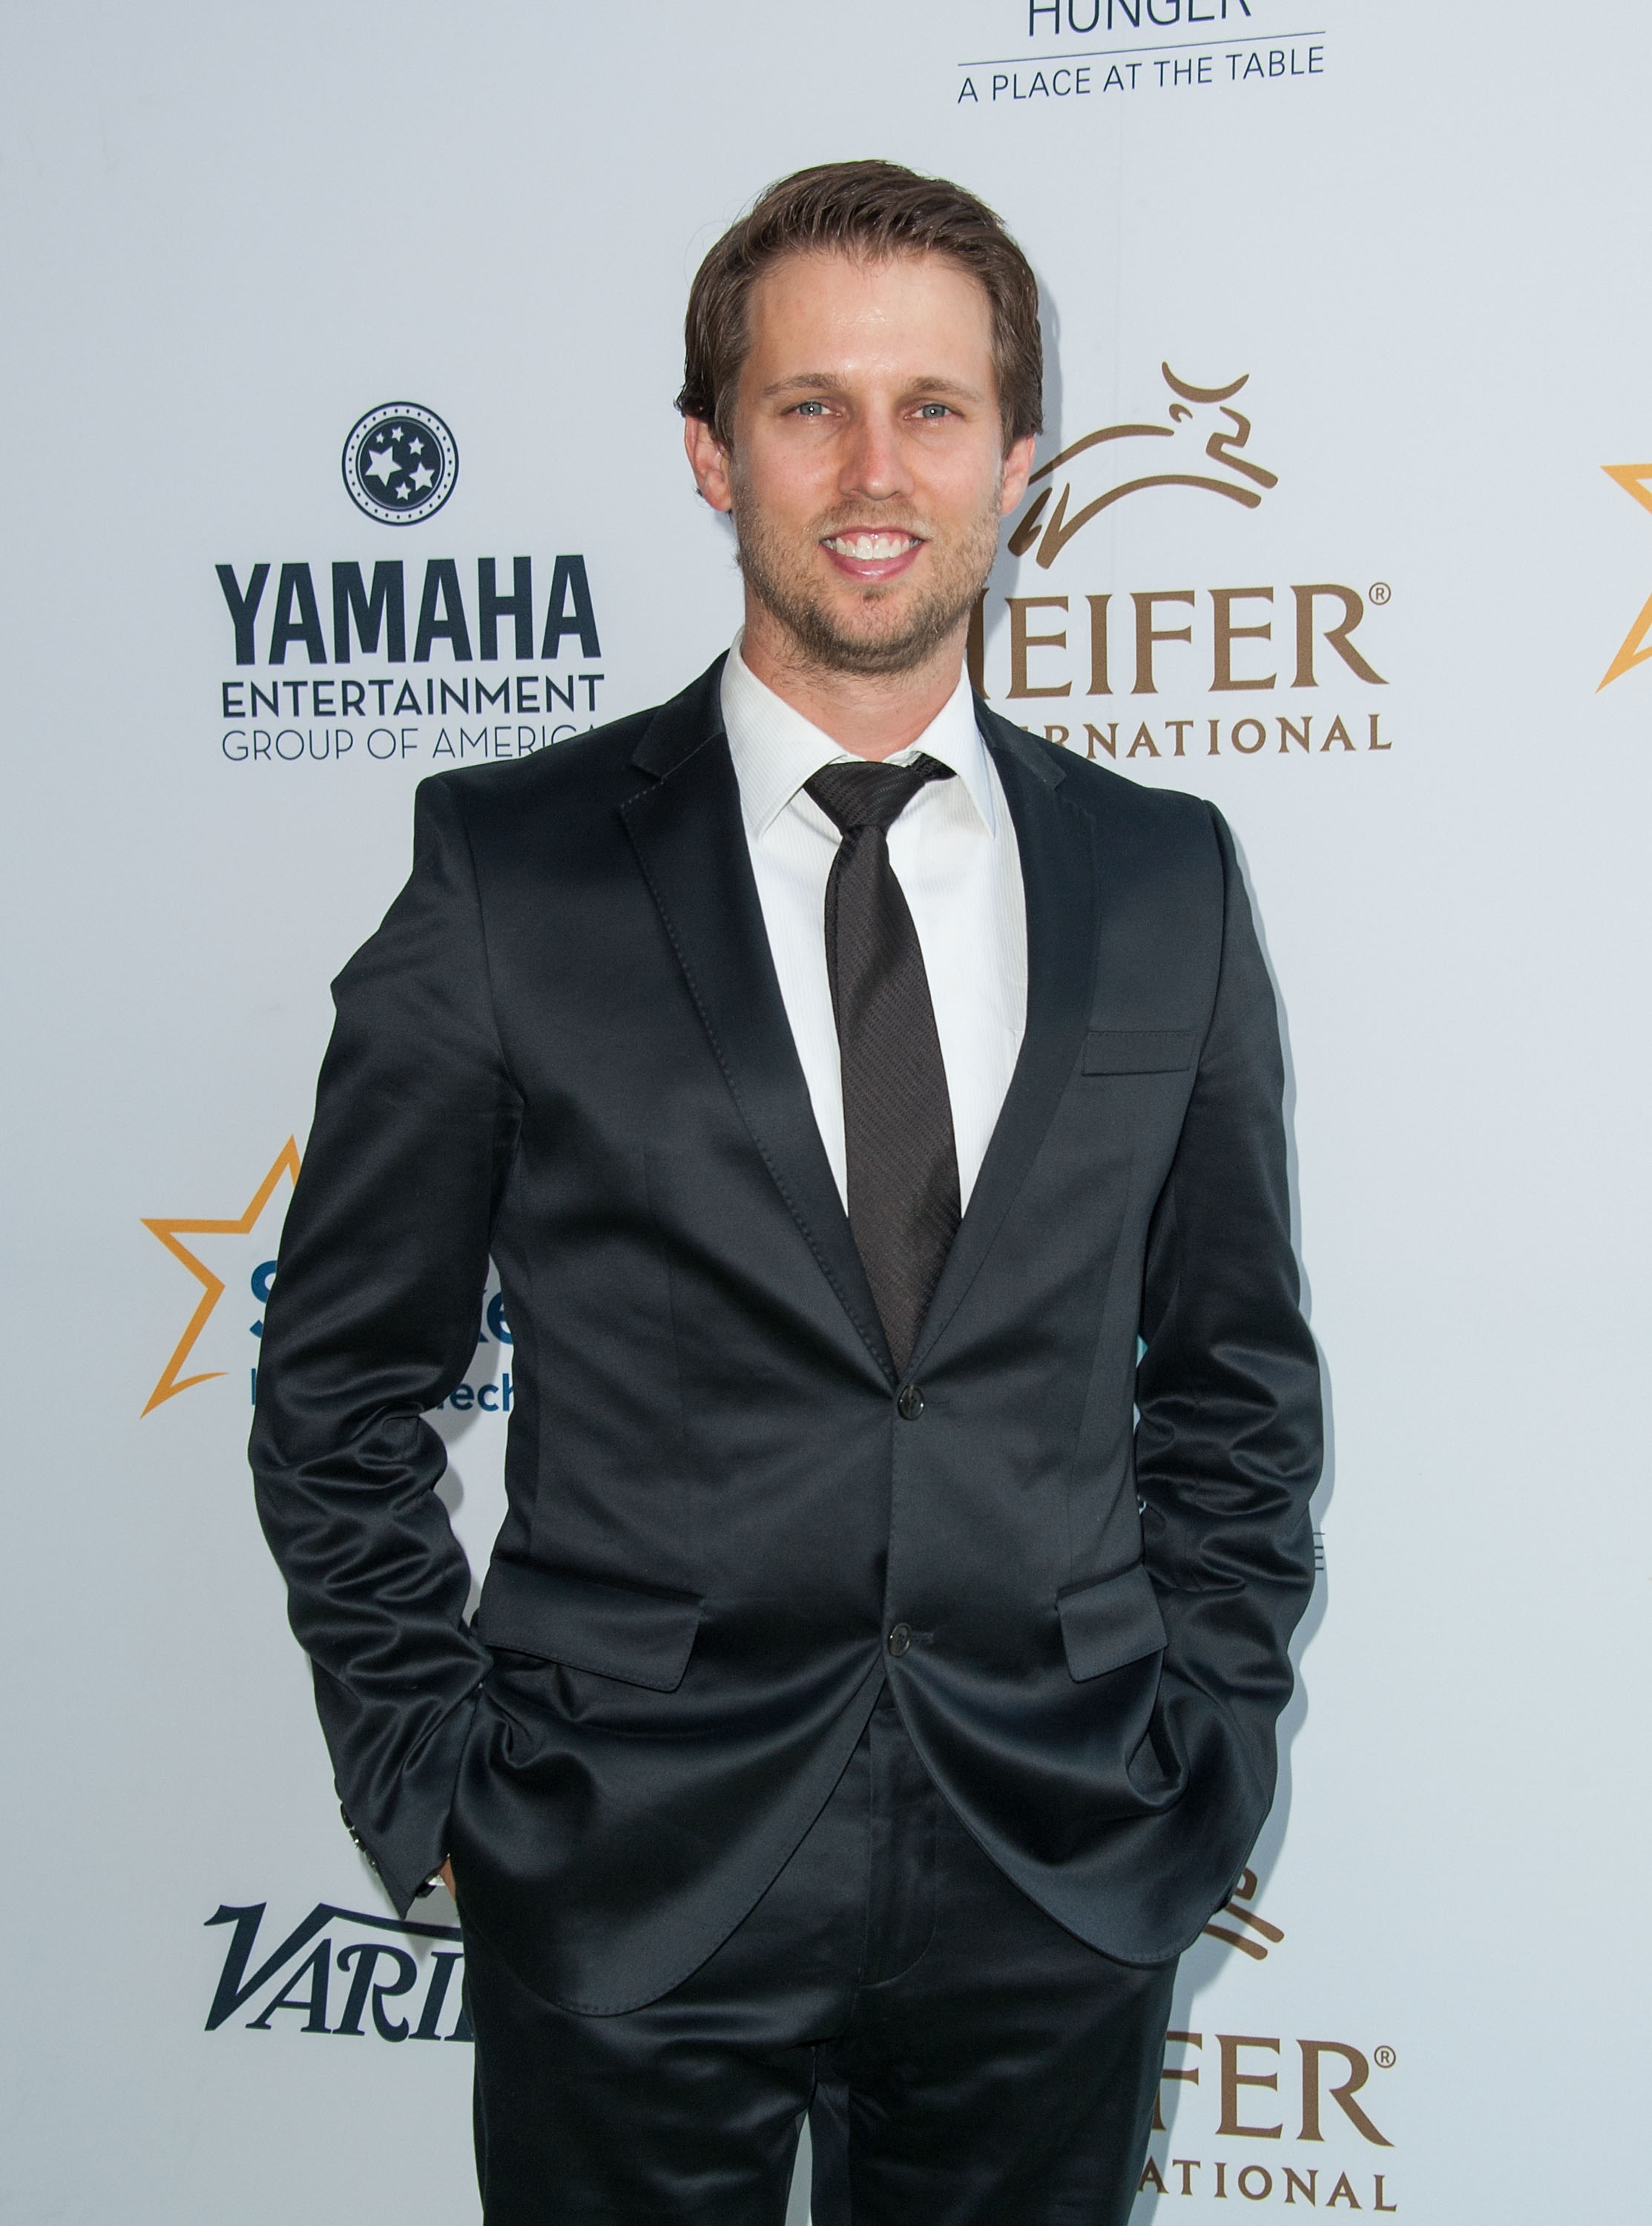 BEVERLY HILLS, CA - AUGUST 22: Actor Jon Heder arrives at the Heifer International's 3rd Annual "Beyond Hunger: A Place At The Table" Gala at Montage Beverly Hills on August 22, 2014 in Beverly Hills, California. (Photo by Valerie Macon/Getty Images)